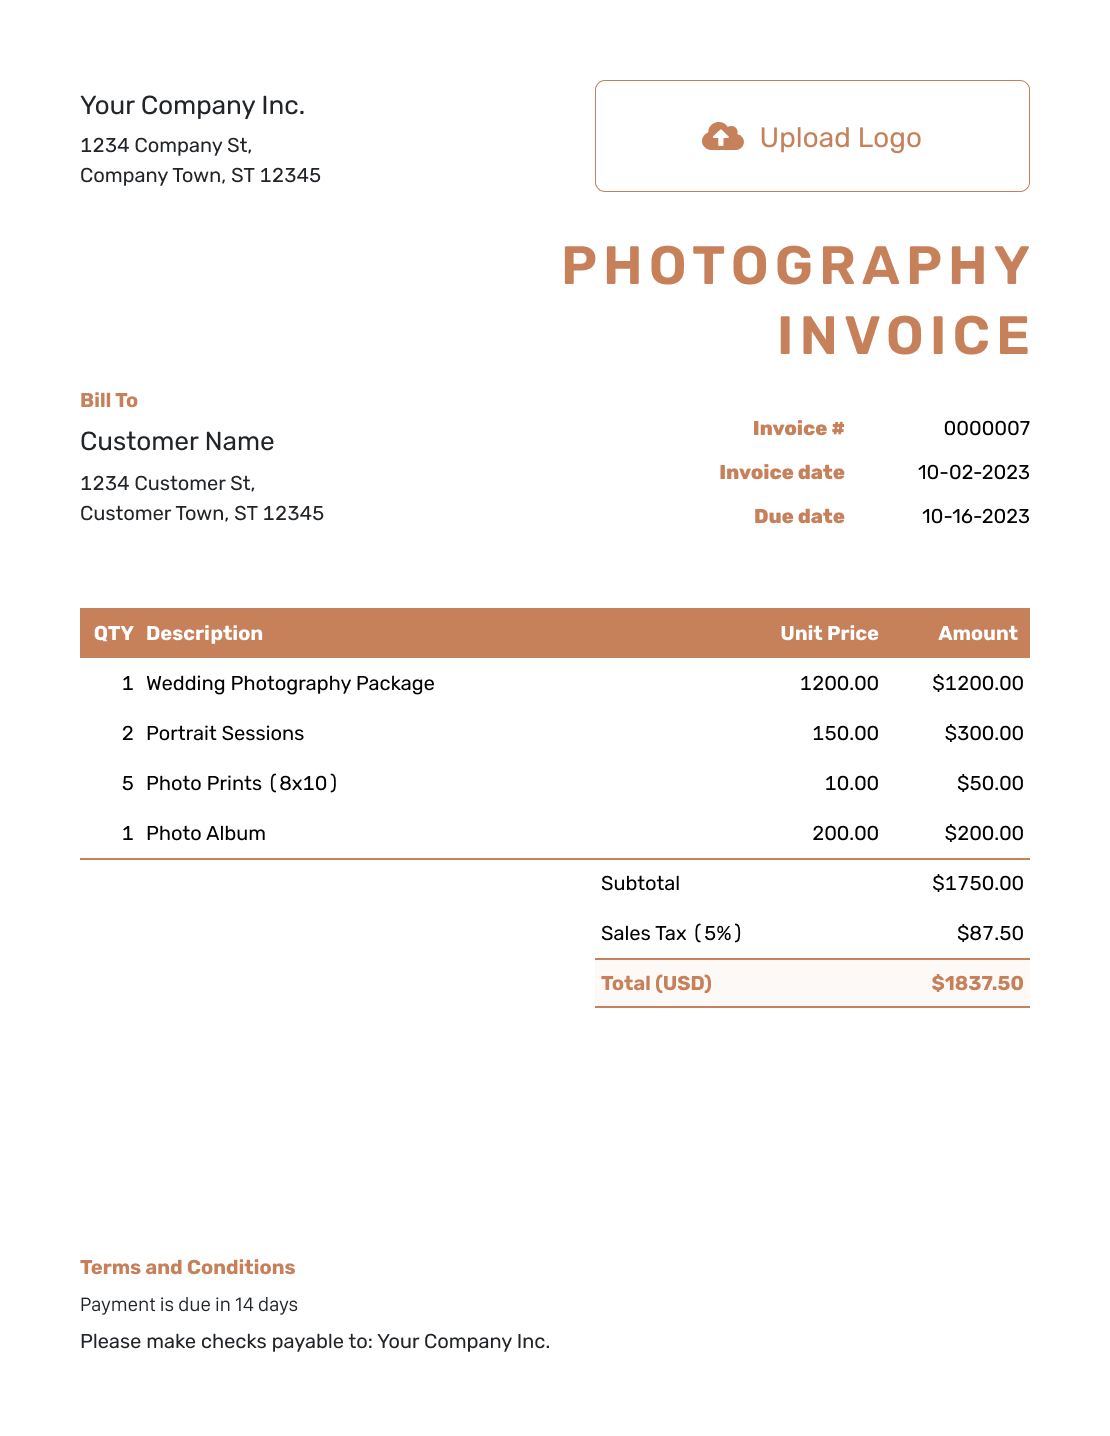 Standard Photography Invoice Template